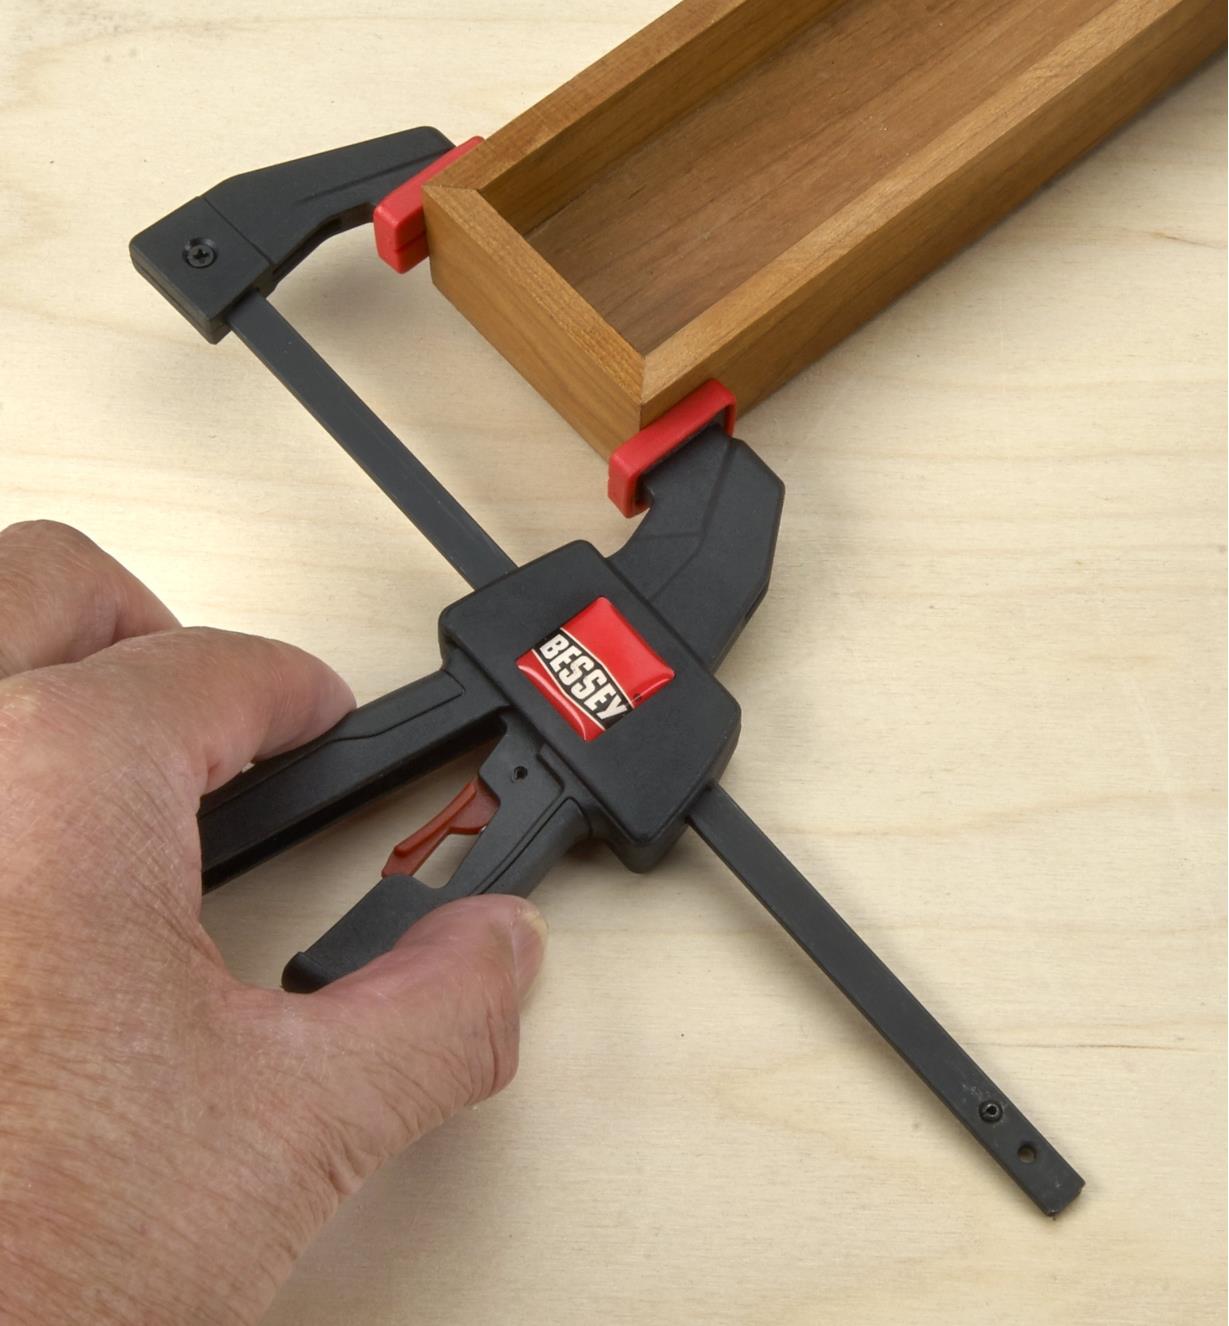 Using a micro-trigger clamp to clamp a rectangular wooden box